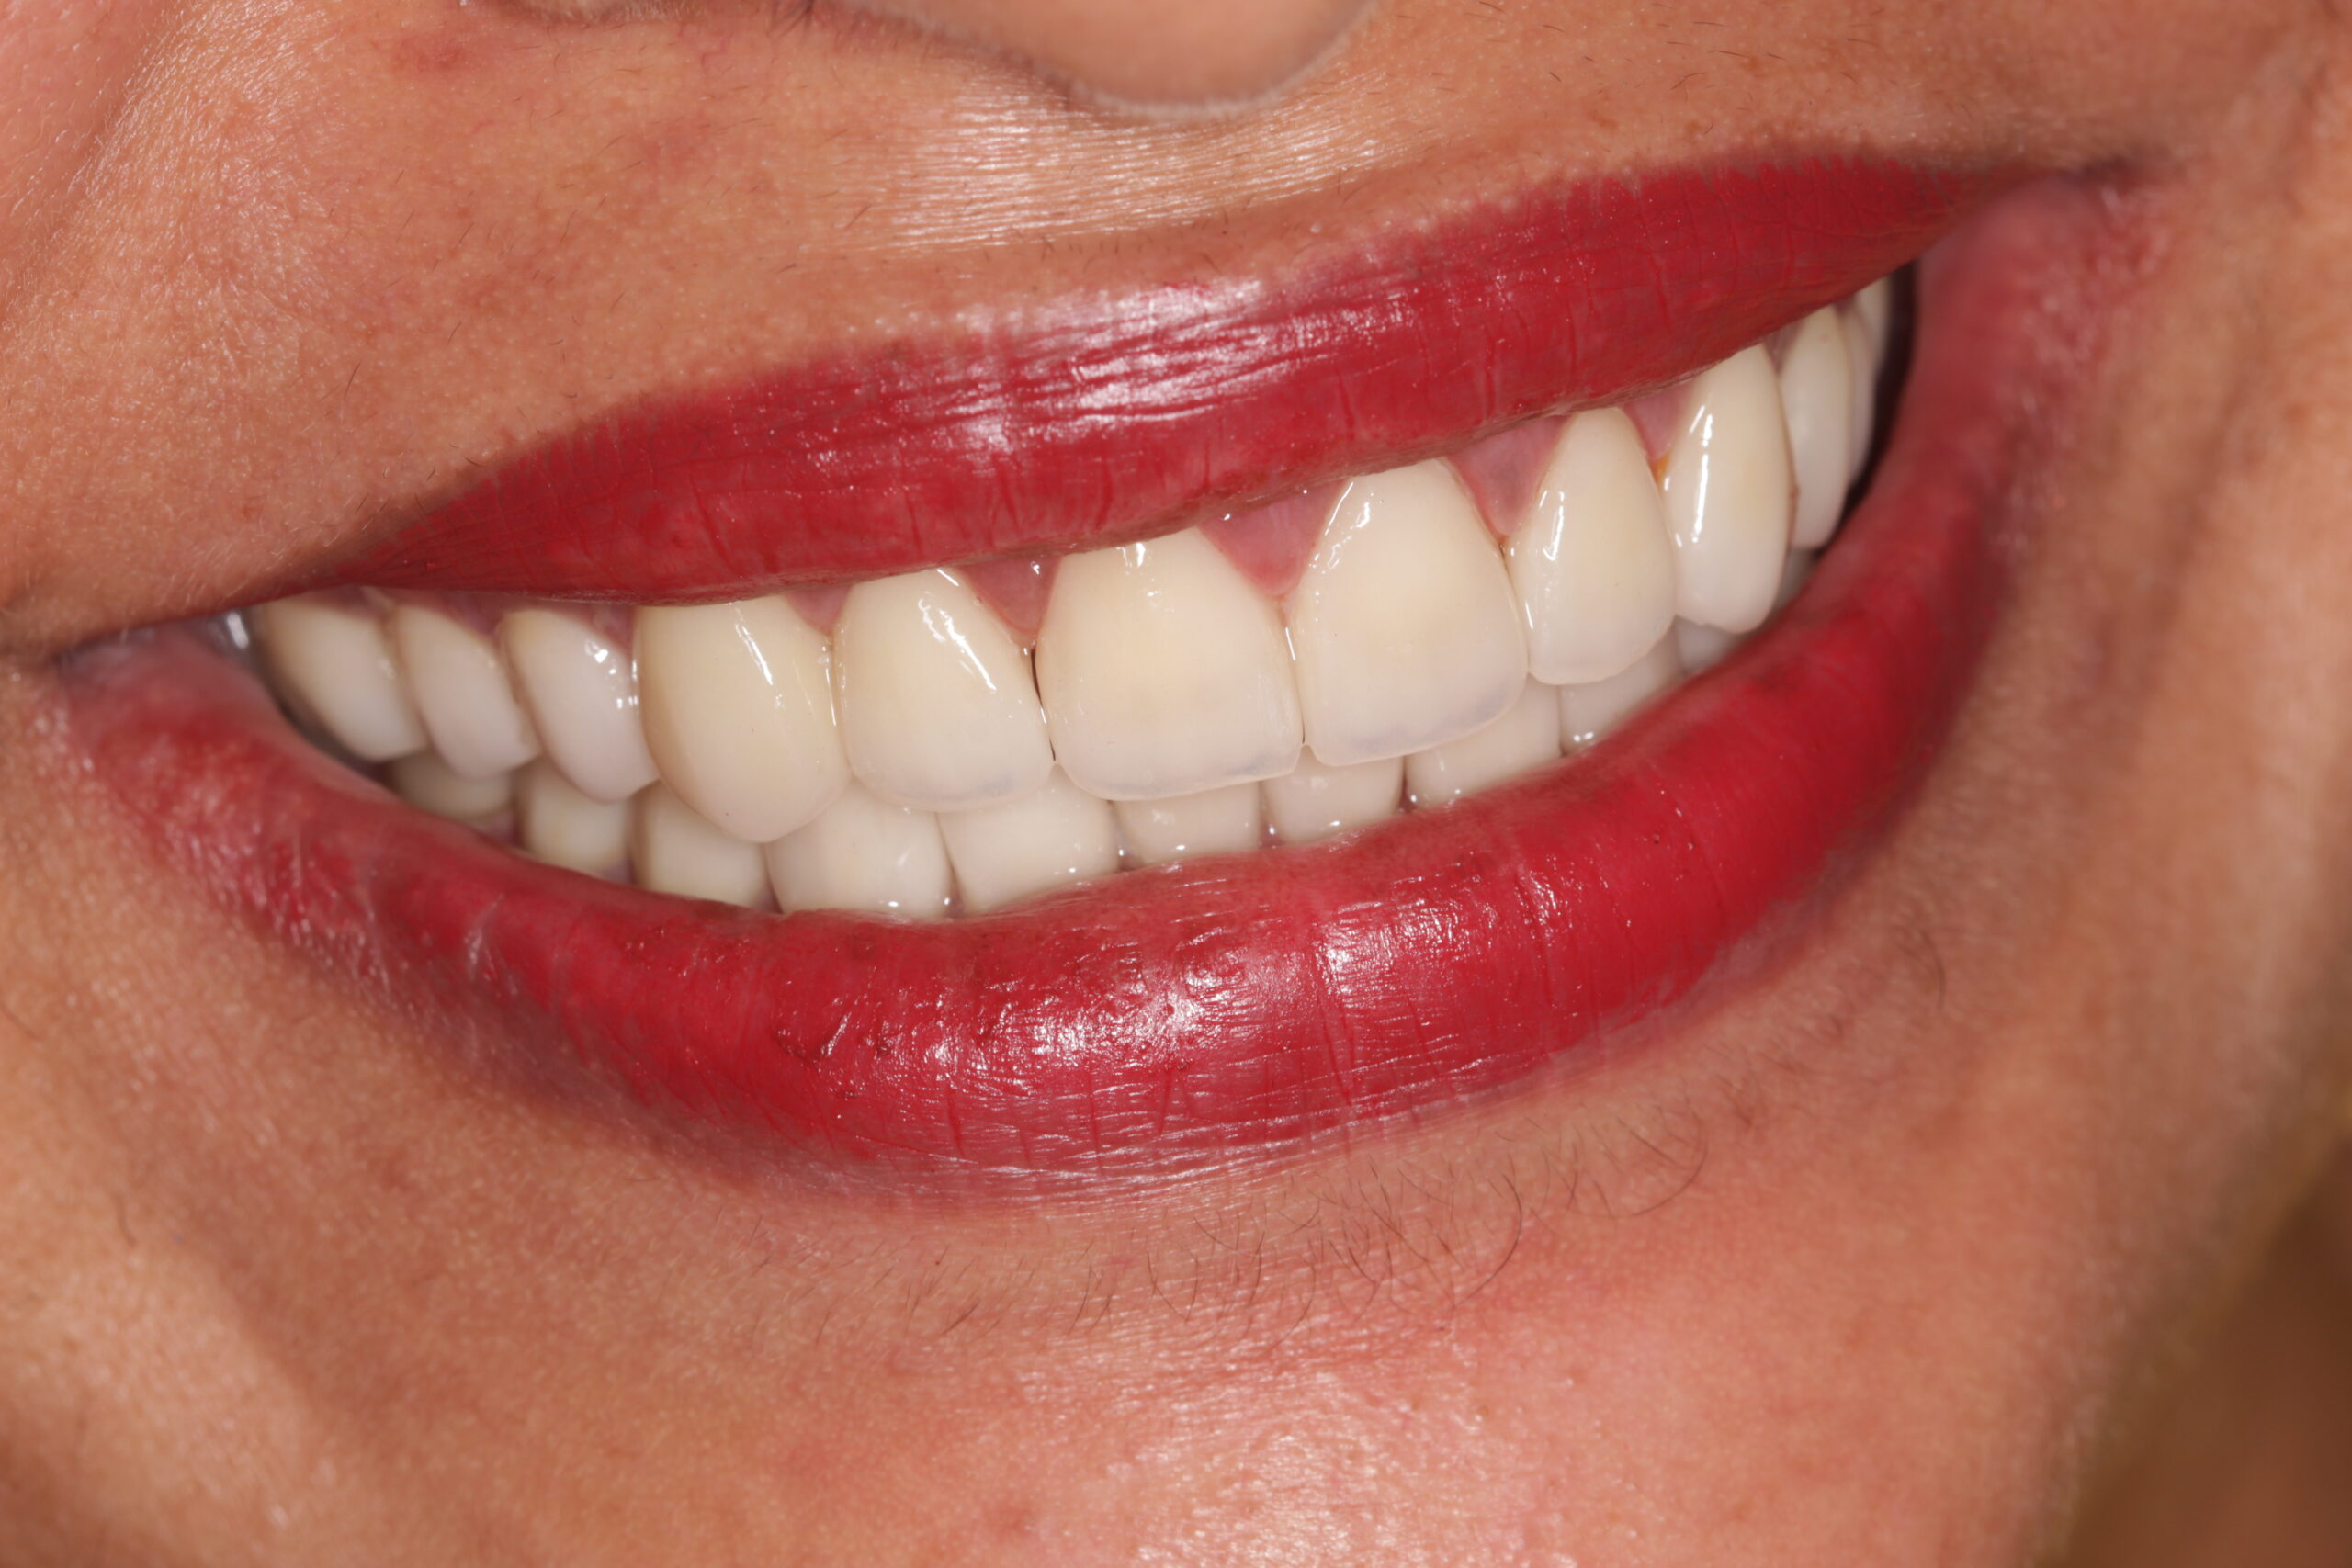 http://dentalexcellence.co.in/wp-content/uploads/2022/04/Pt-1-Post-2-2-scaled.jpg